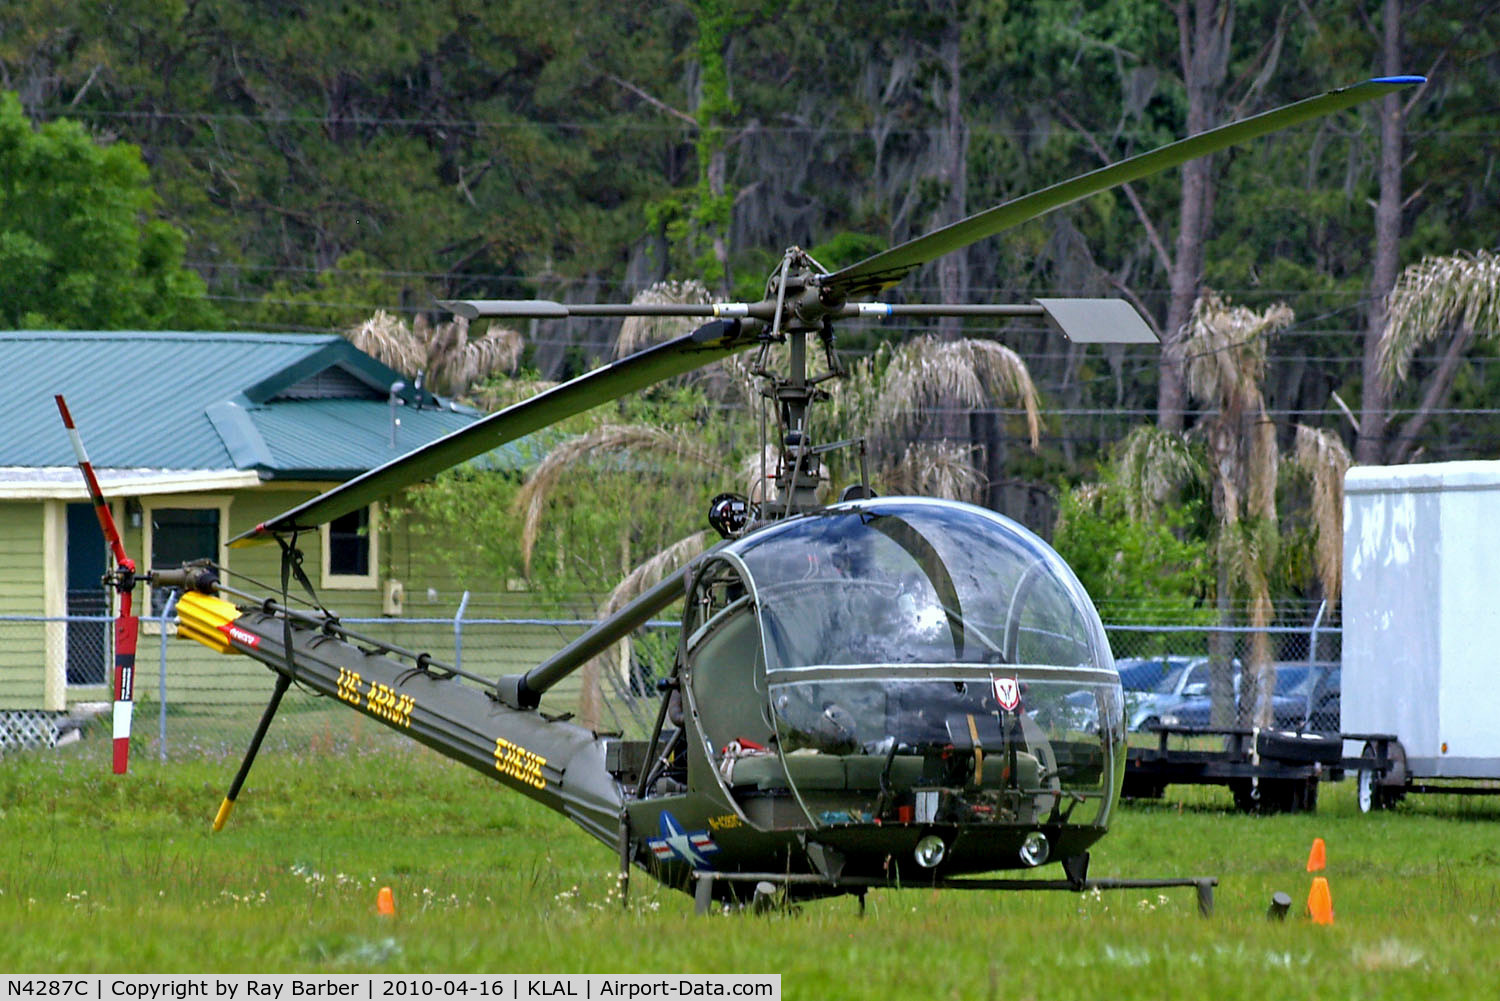 N4287C, 1951 Hiller UH-12A C/N 269, N4287C   Hiller H-23A Raven [269] Lakeland-Linder~N 16/04/2010. Wears former military marks and colour scheme.